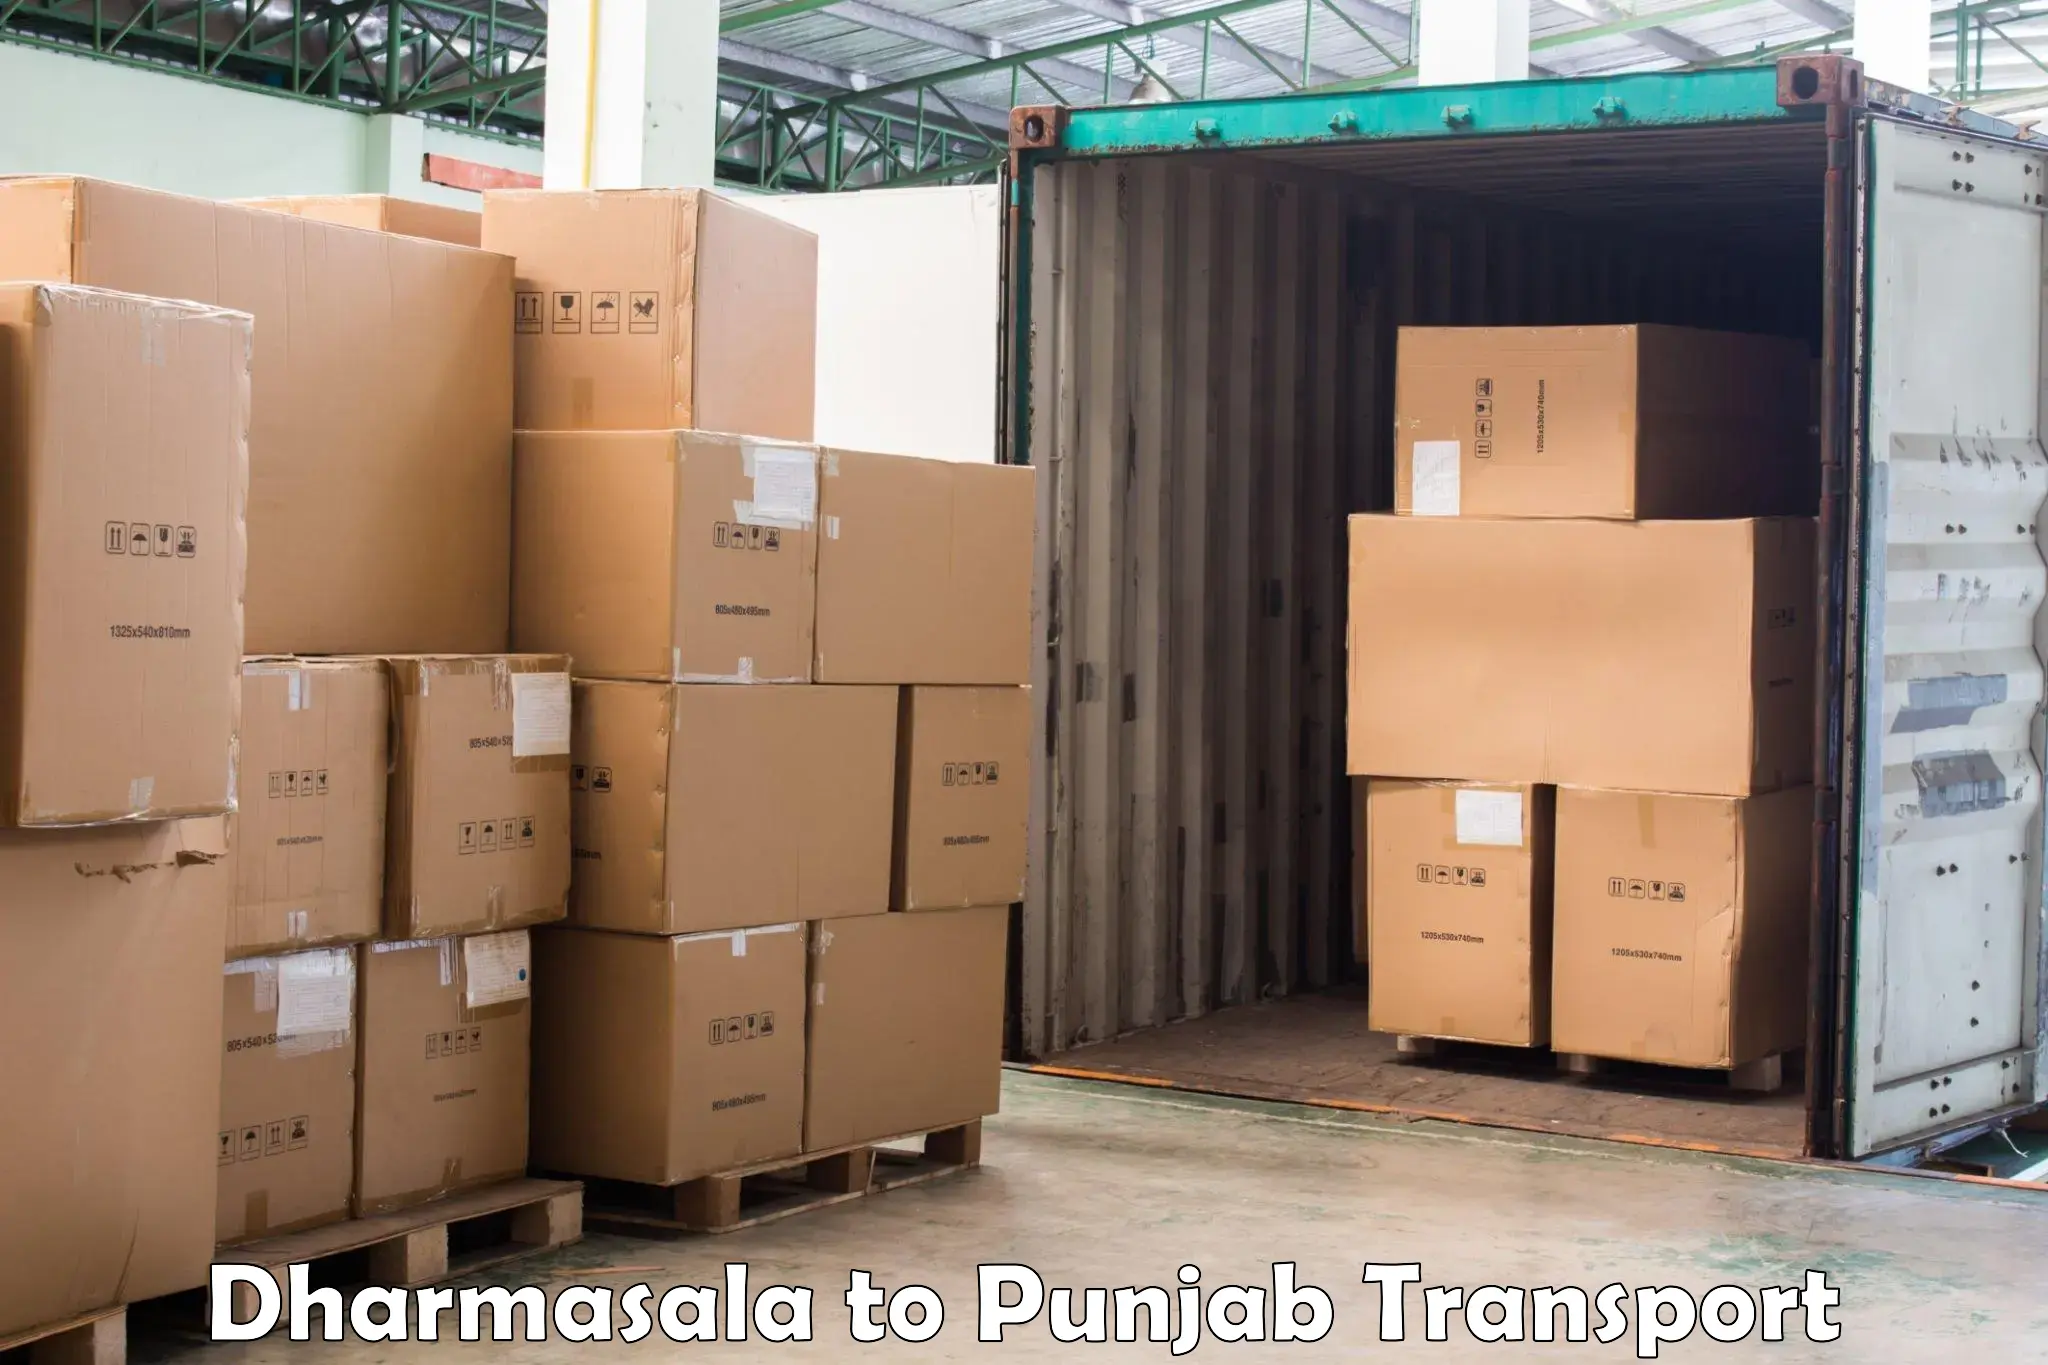 Pick up transport service Dharmasala to Ludhiana